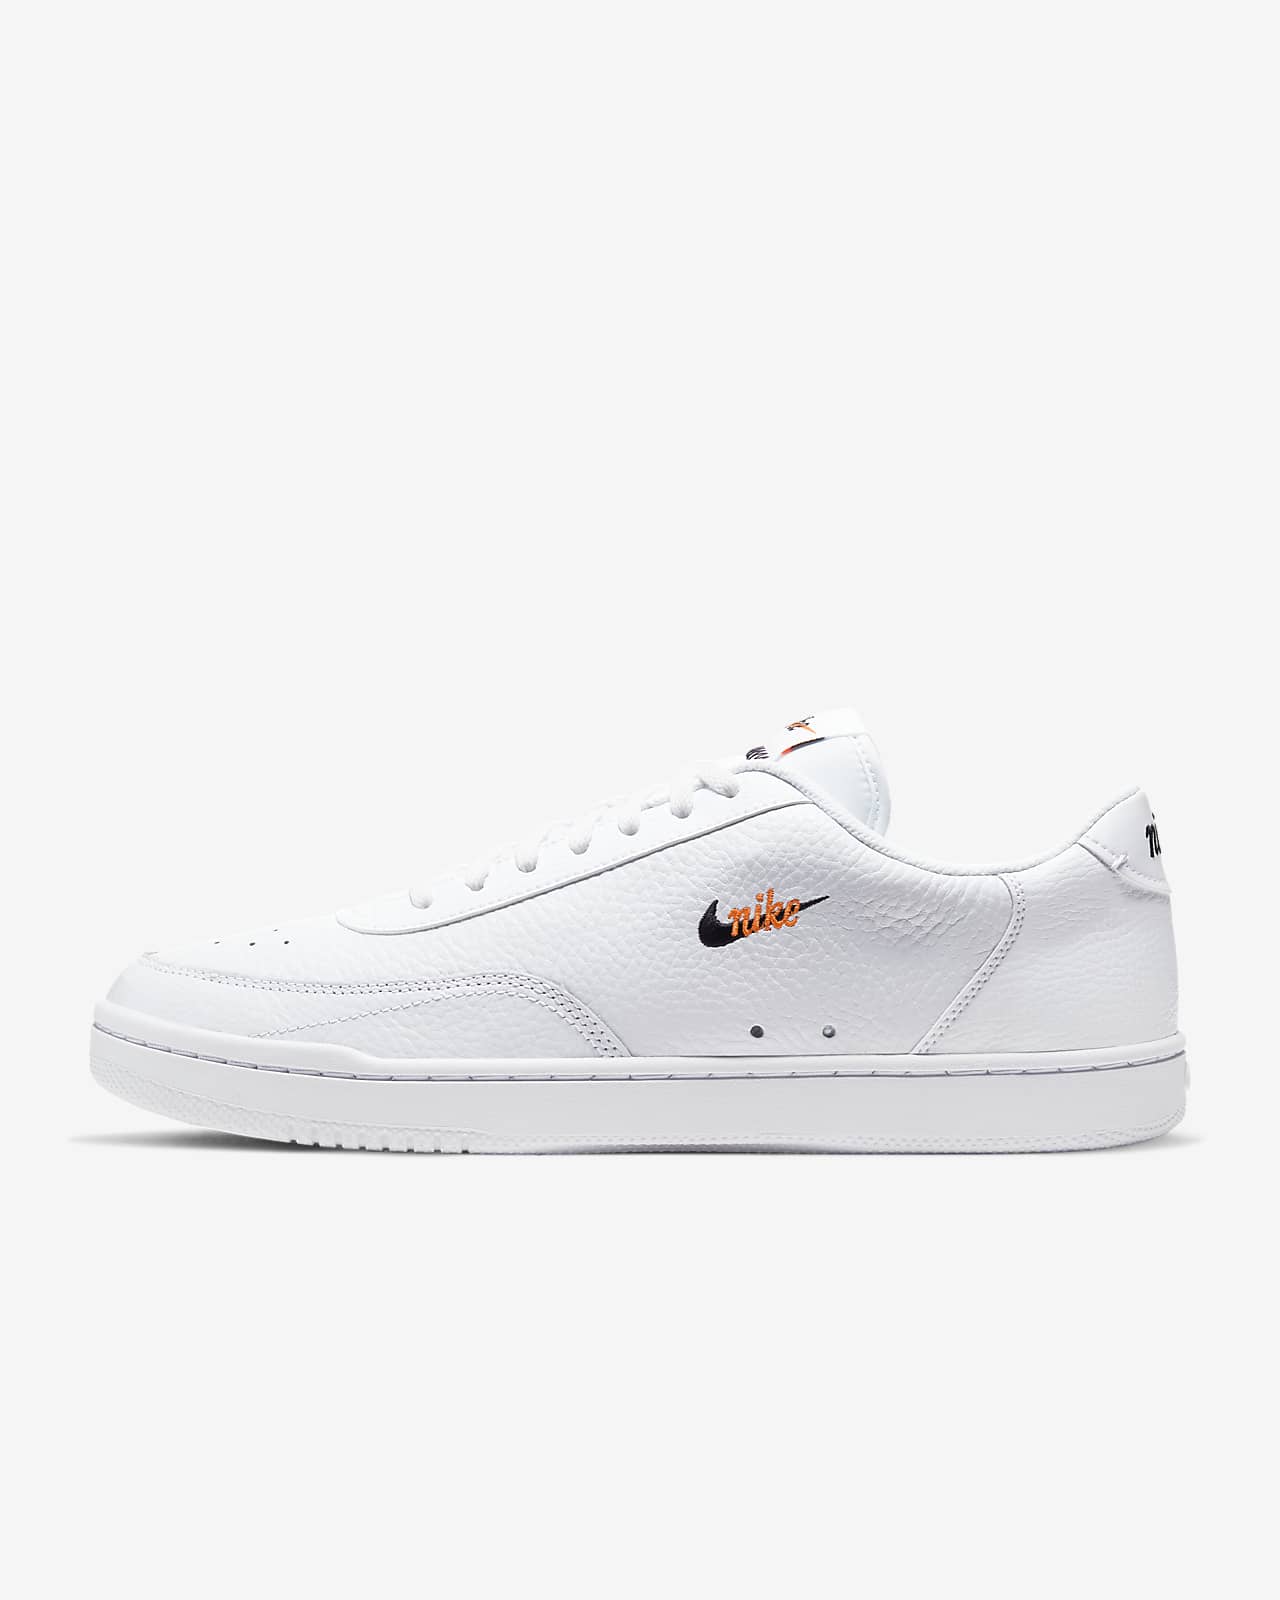 nike court trainers mens